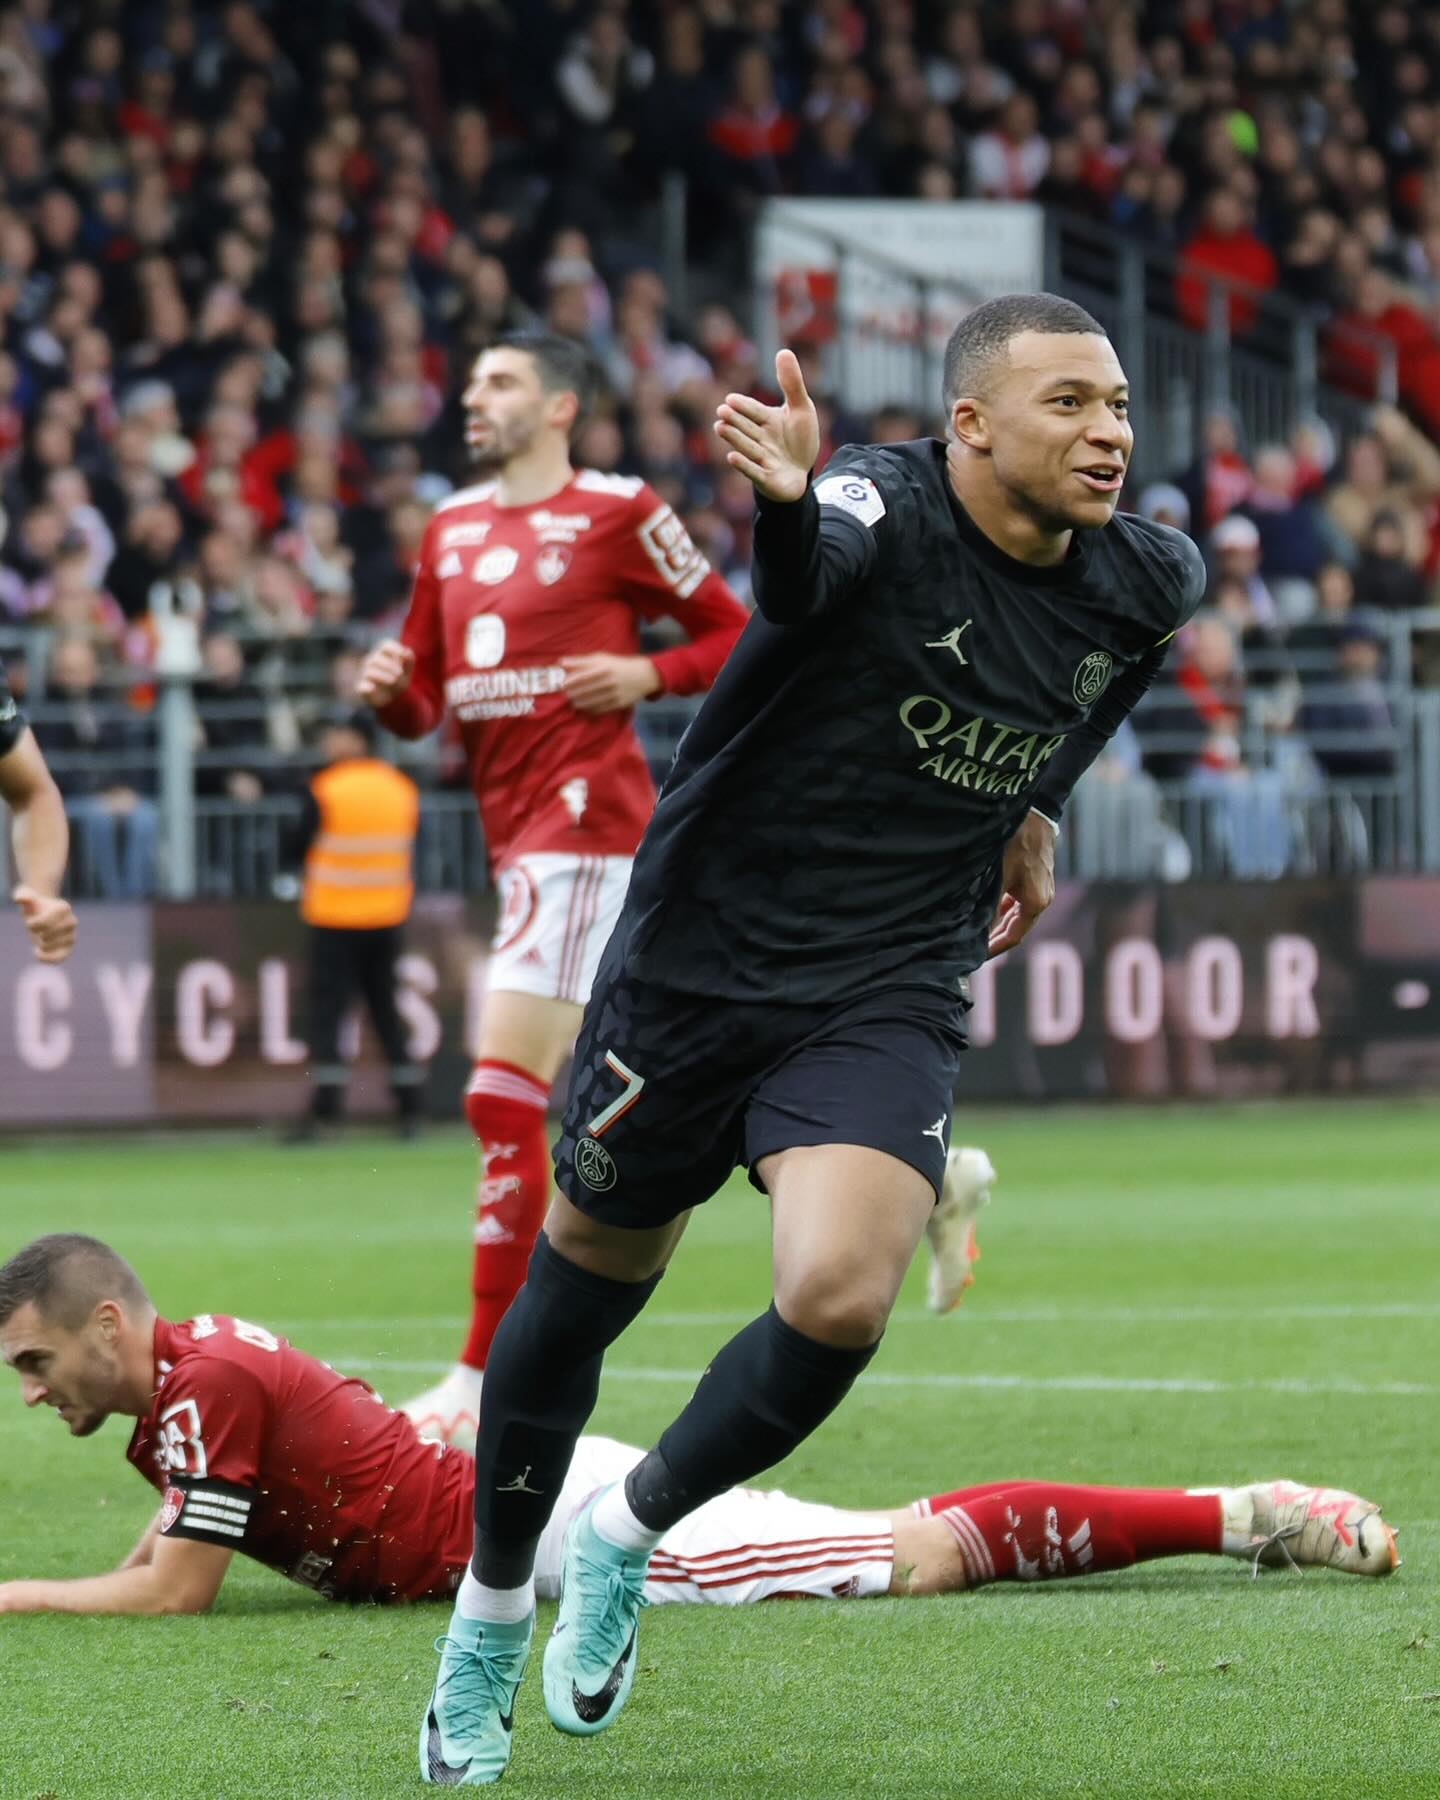 Ligue 1 launches a badge for the top scorer This weekend, all eyes on Mbappé